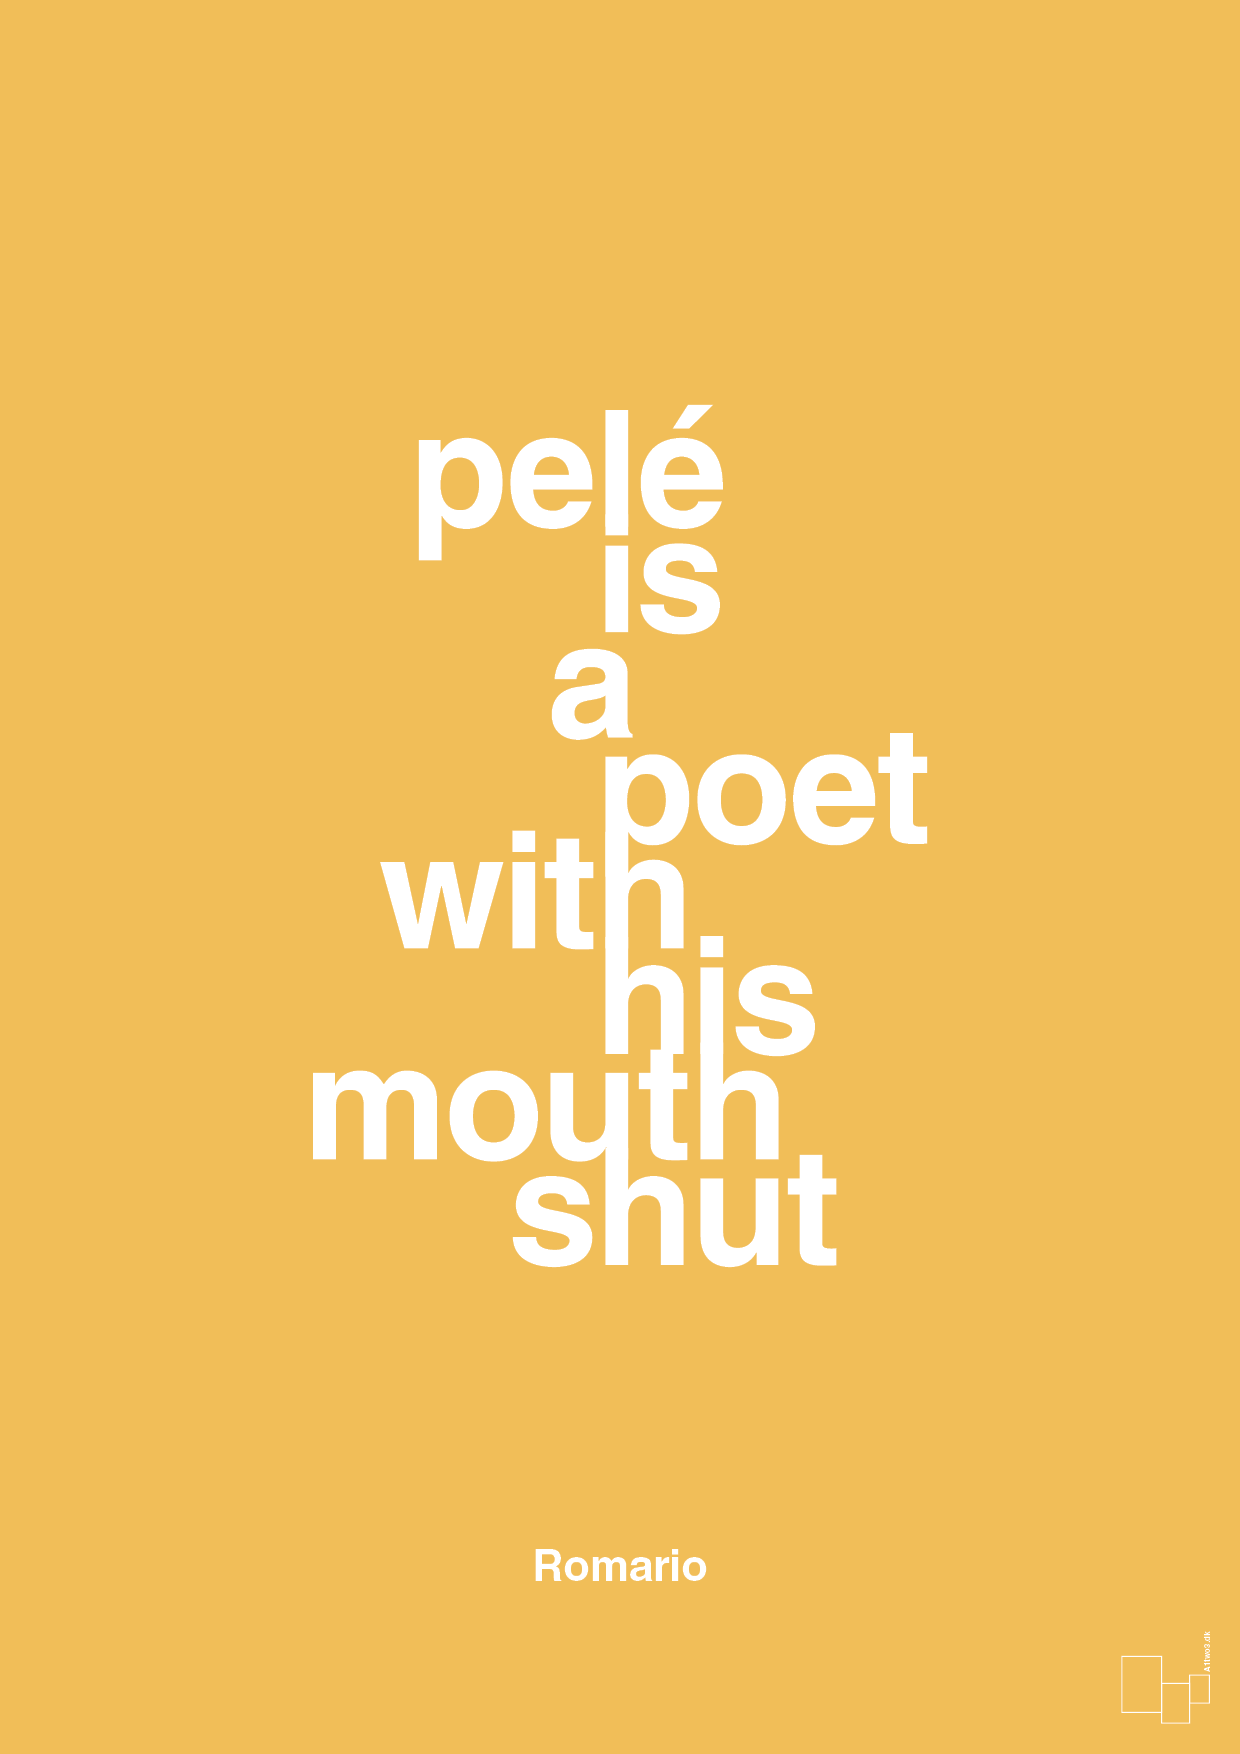 pelé is a poet with his mouth shut - Plakat med Citater i Honeycomb